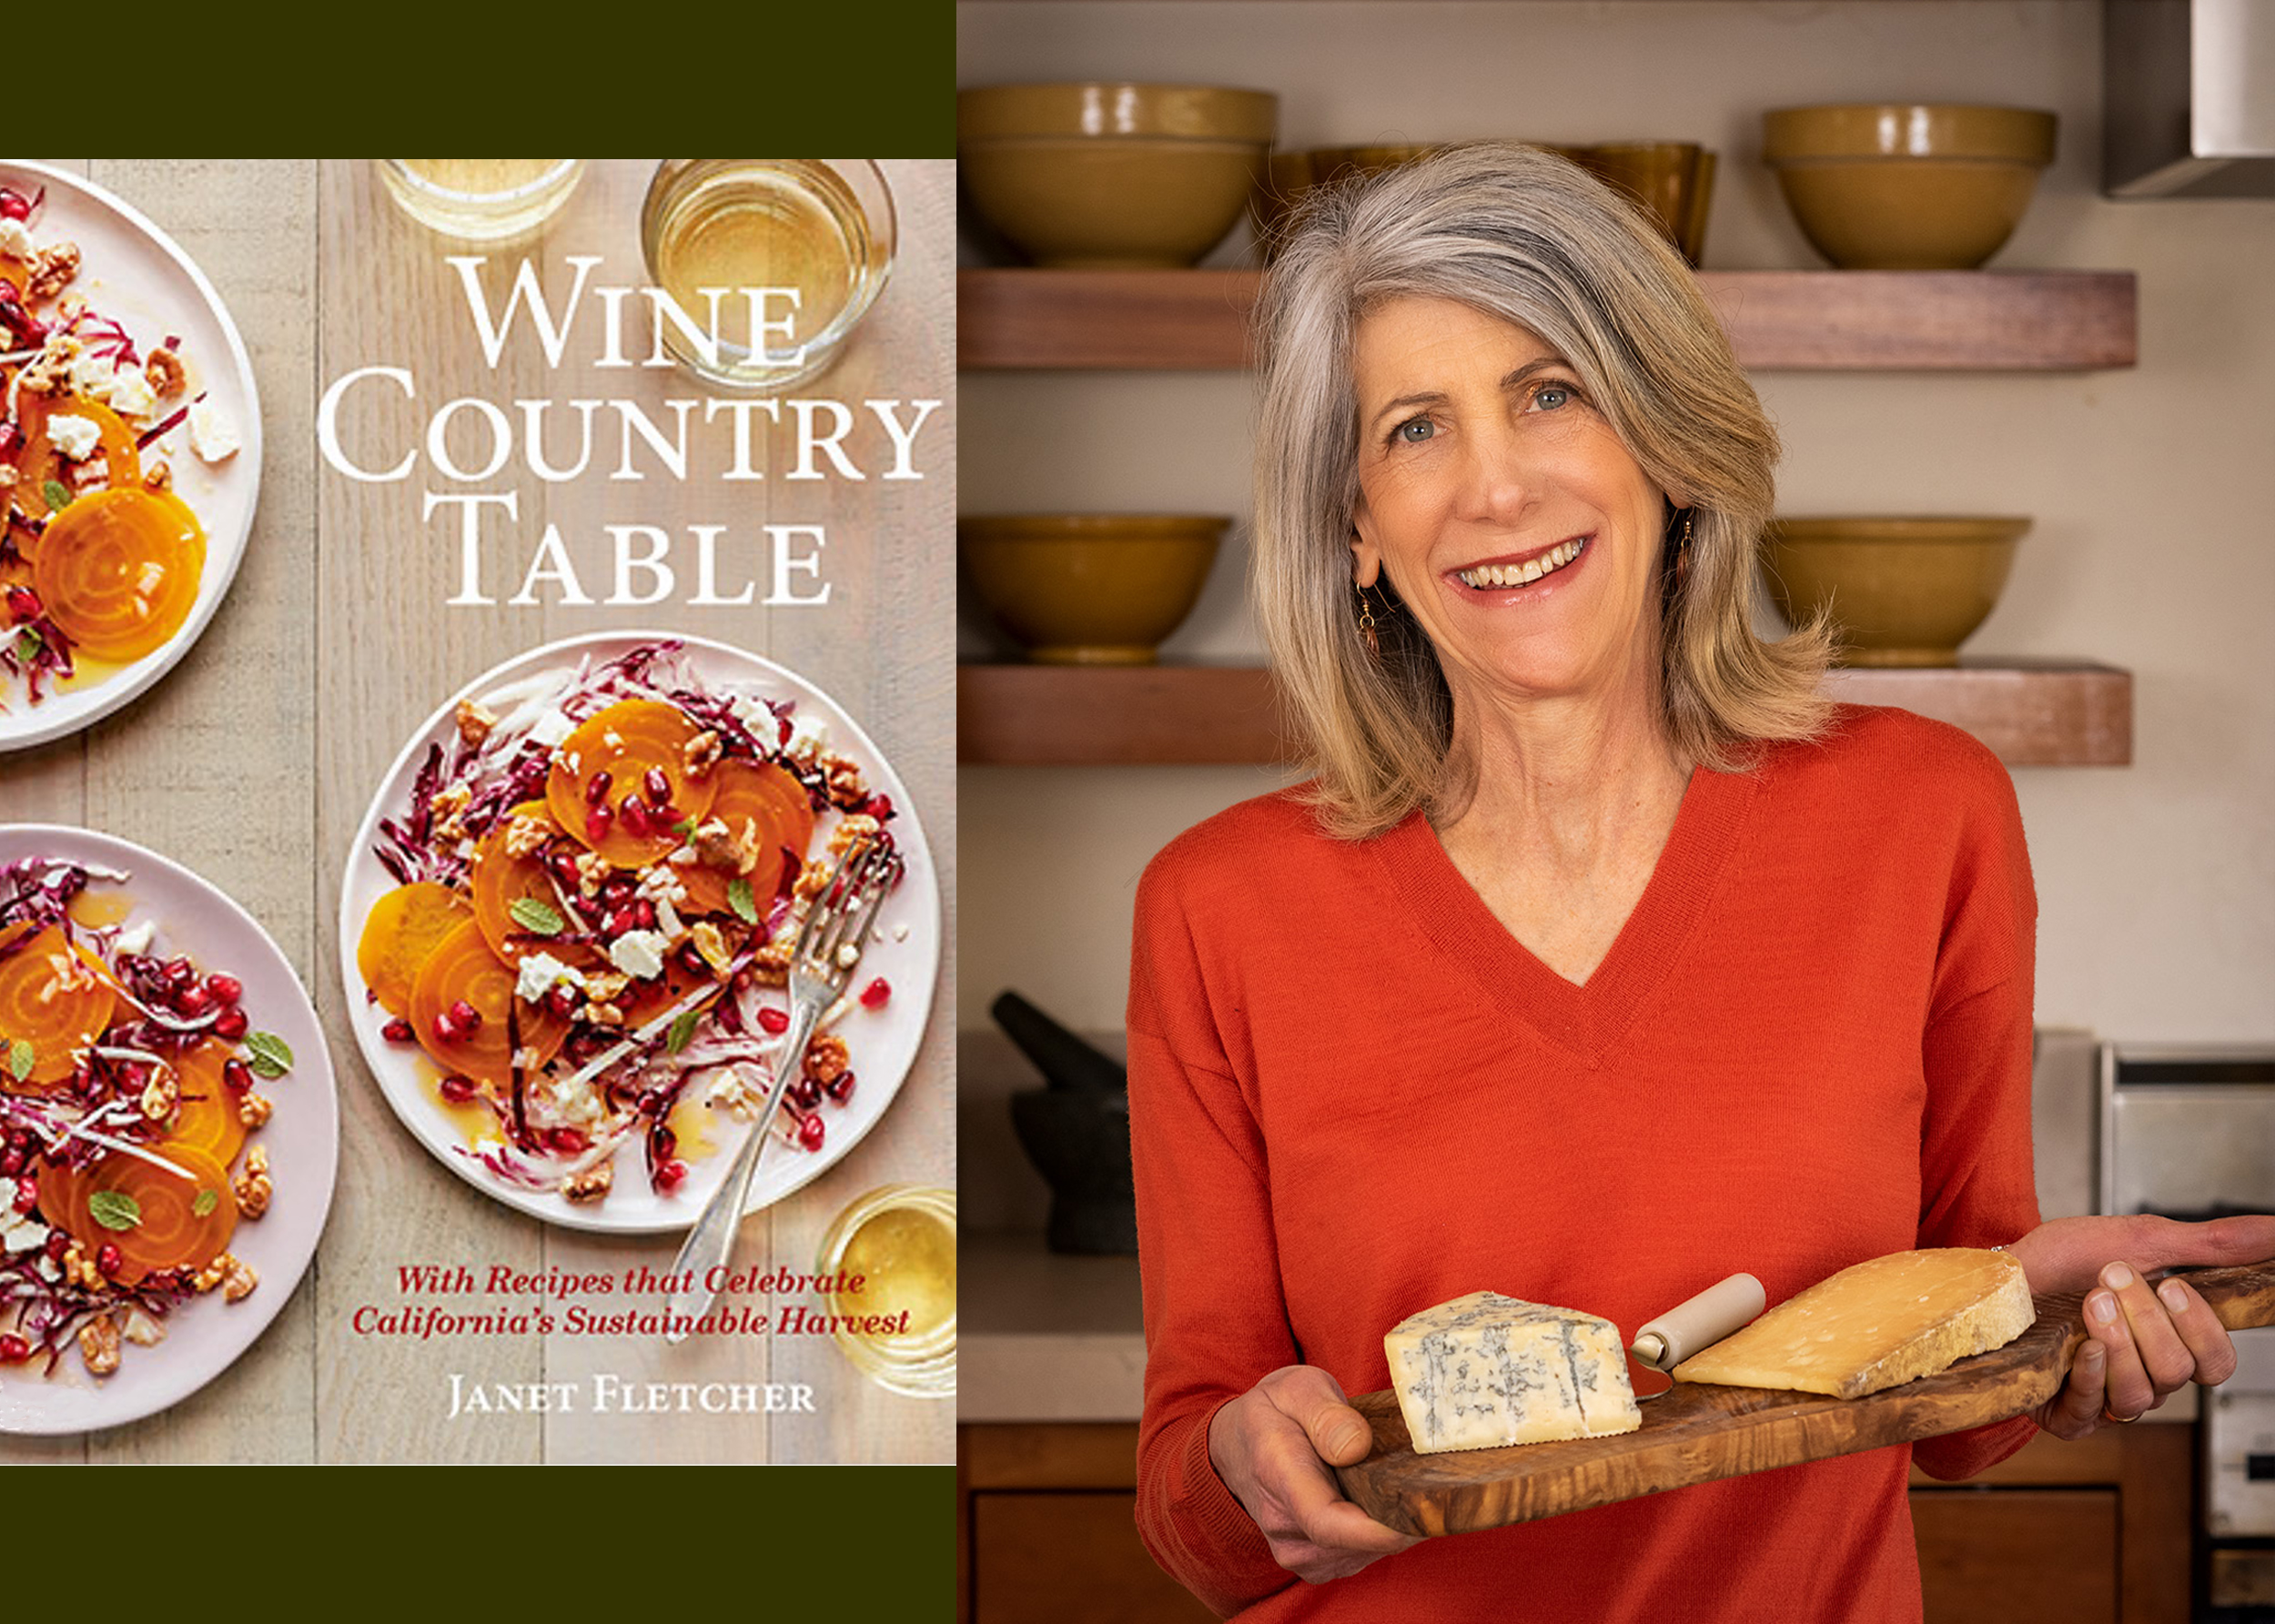 Exploring Wine and Cheese with Janet Fletcher